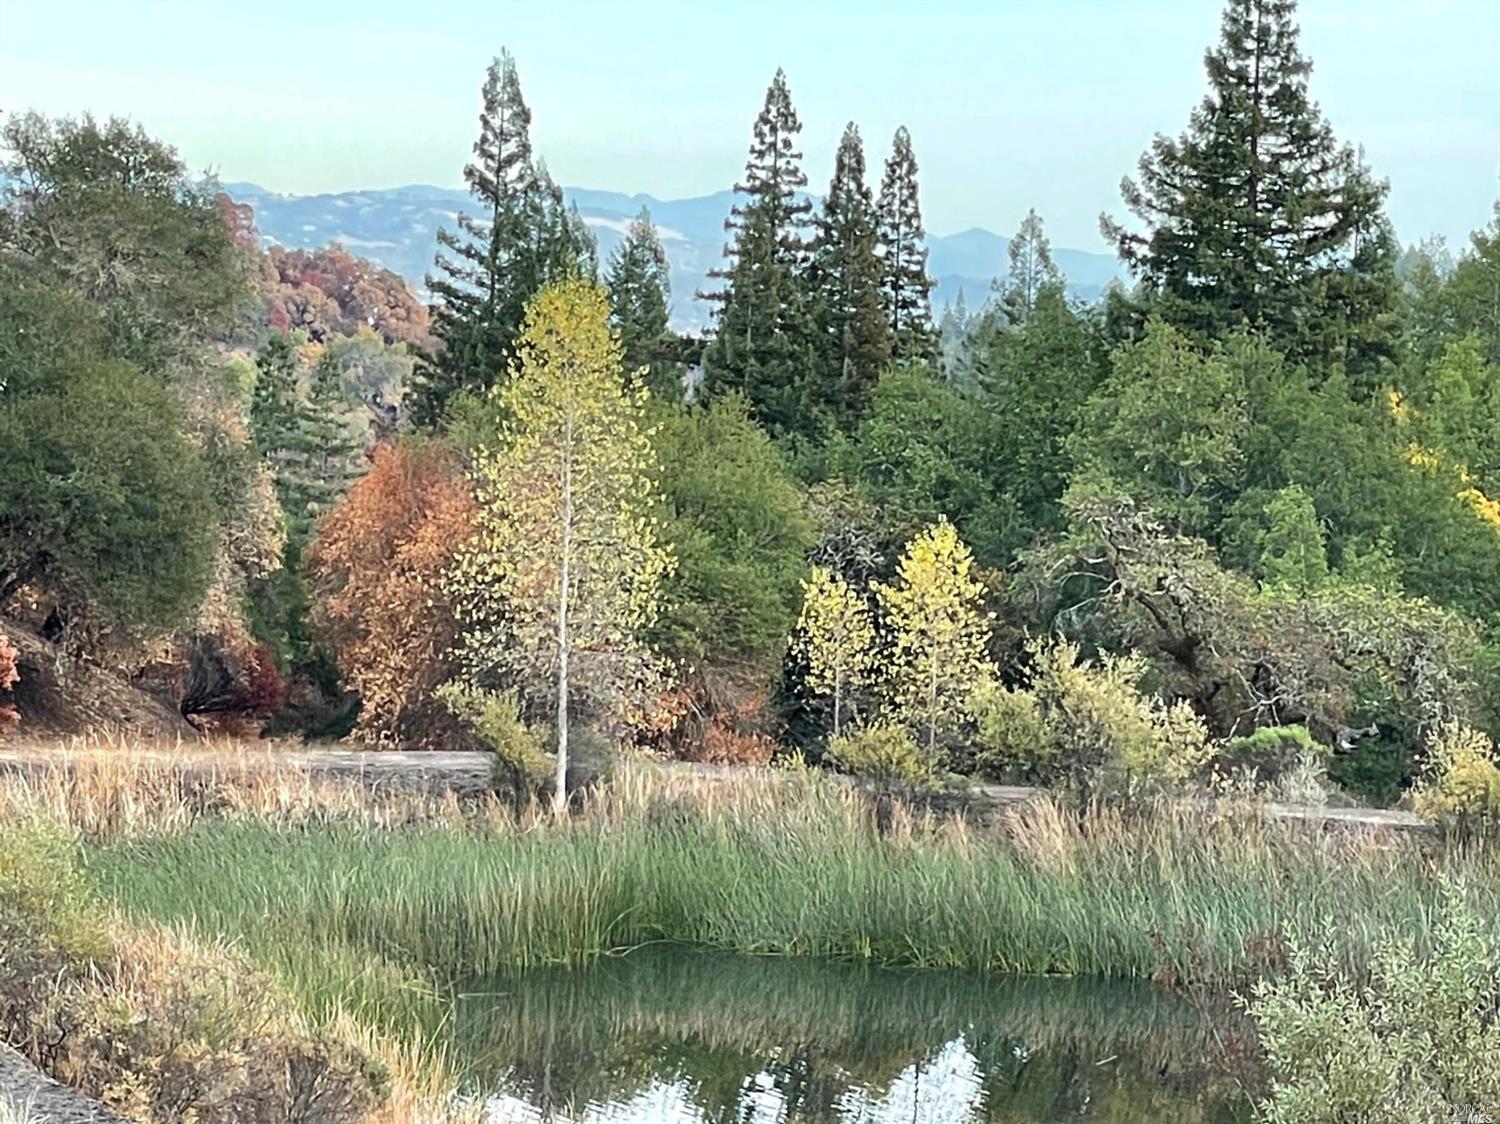 Amazing views with 3 ponds on this 475 Ac only 15 minutes west of Healdsburg's downtown Plaza (5 miles) and 80 min to Golden Gate Bridge.  Seclusion at its best with local amenities nearby in a world class small town and easy reach to a world class big City. With 4 legally separate parcels, this offering will be of interest to the buyer looking to build an estate, a family compound, a conservation legacy, or just a good place to park money for the next generation or the next 1031 exchange.